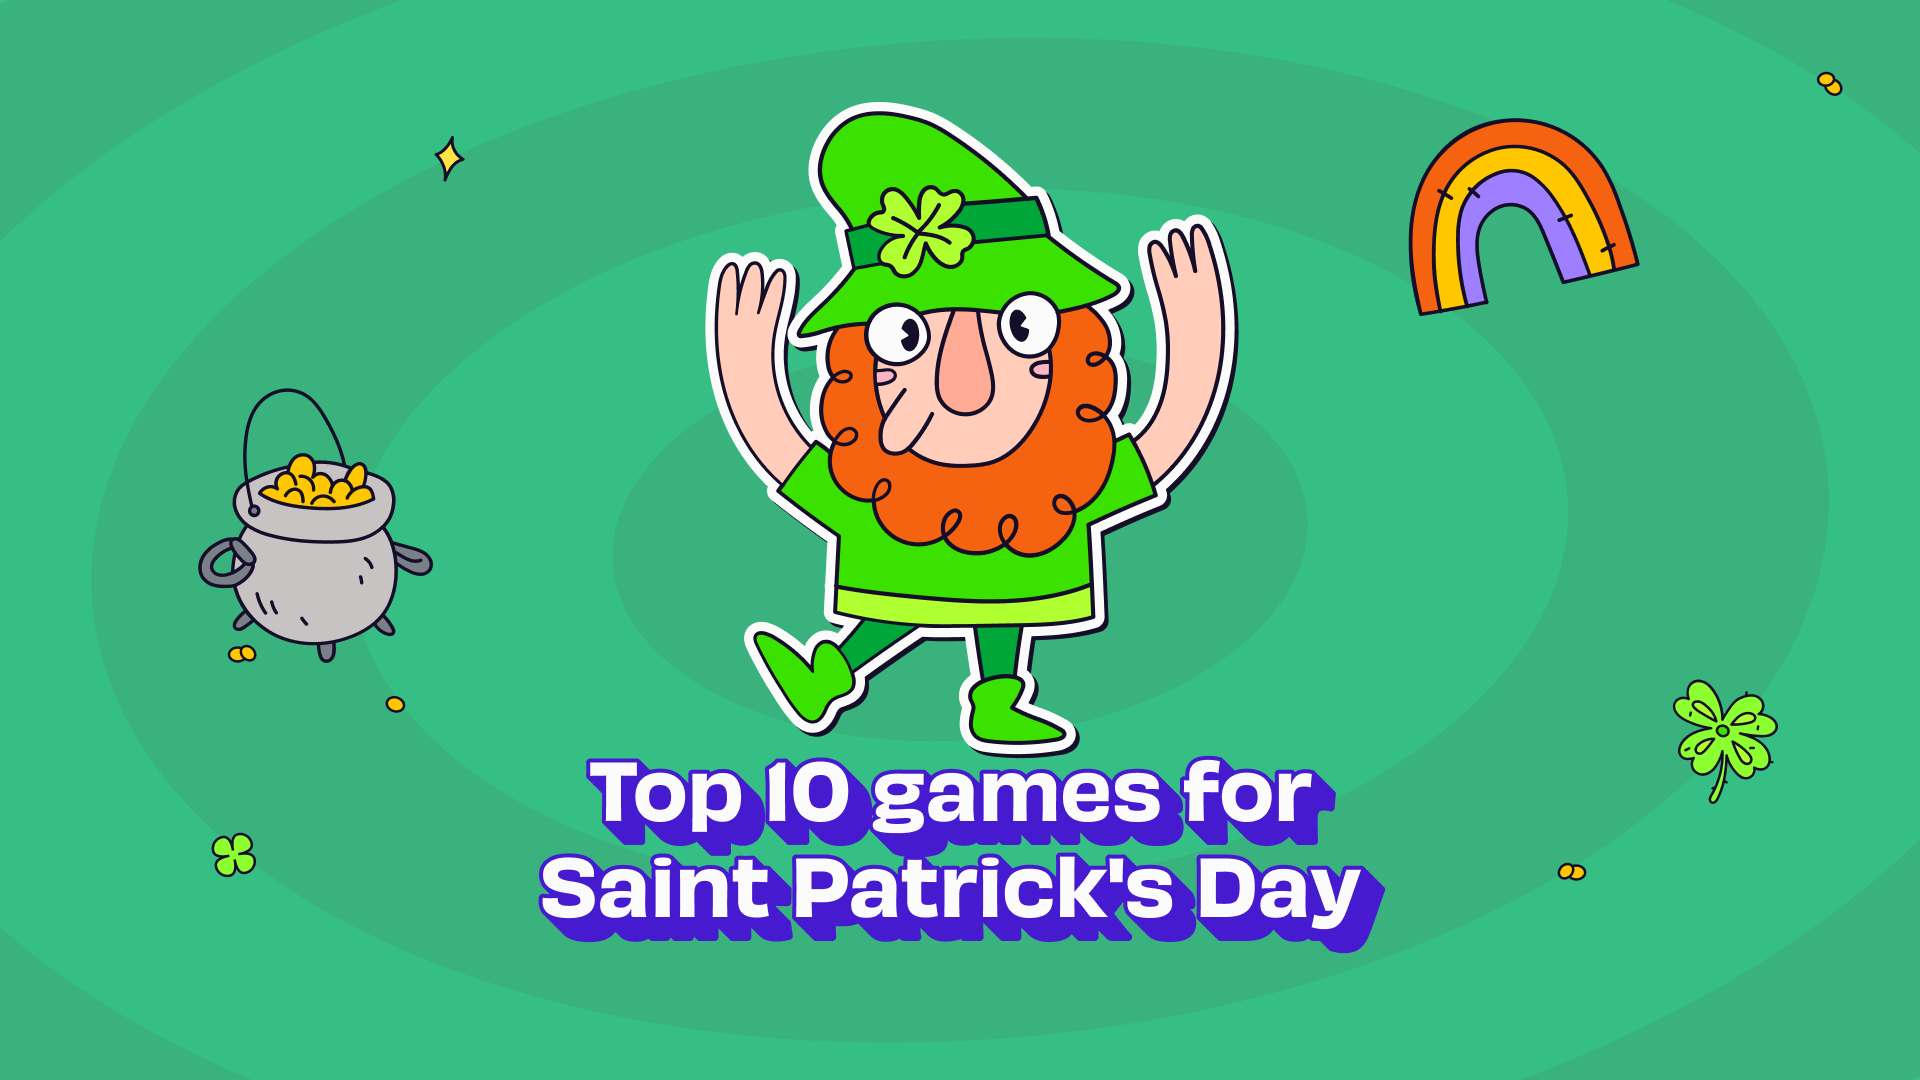 Saint Patrick's day doodle on a green background